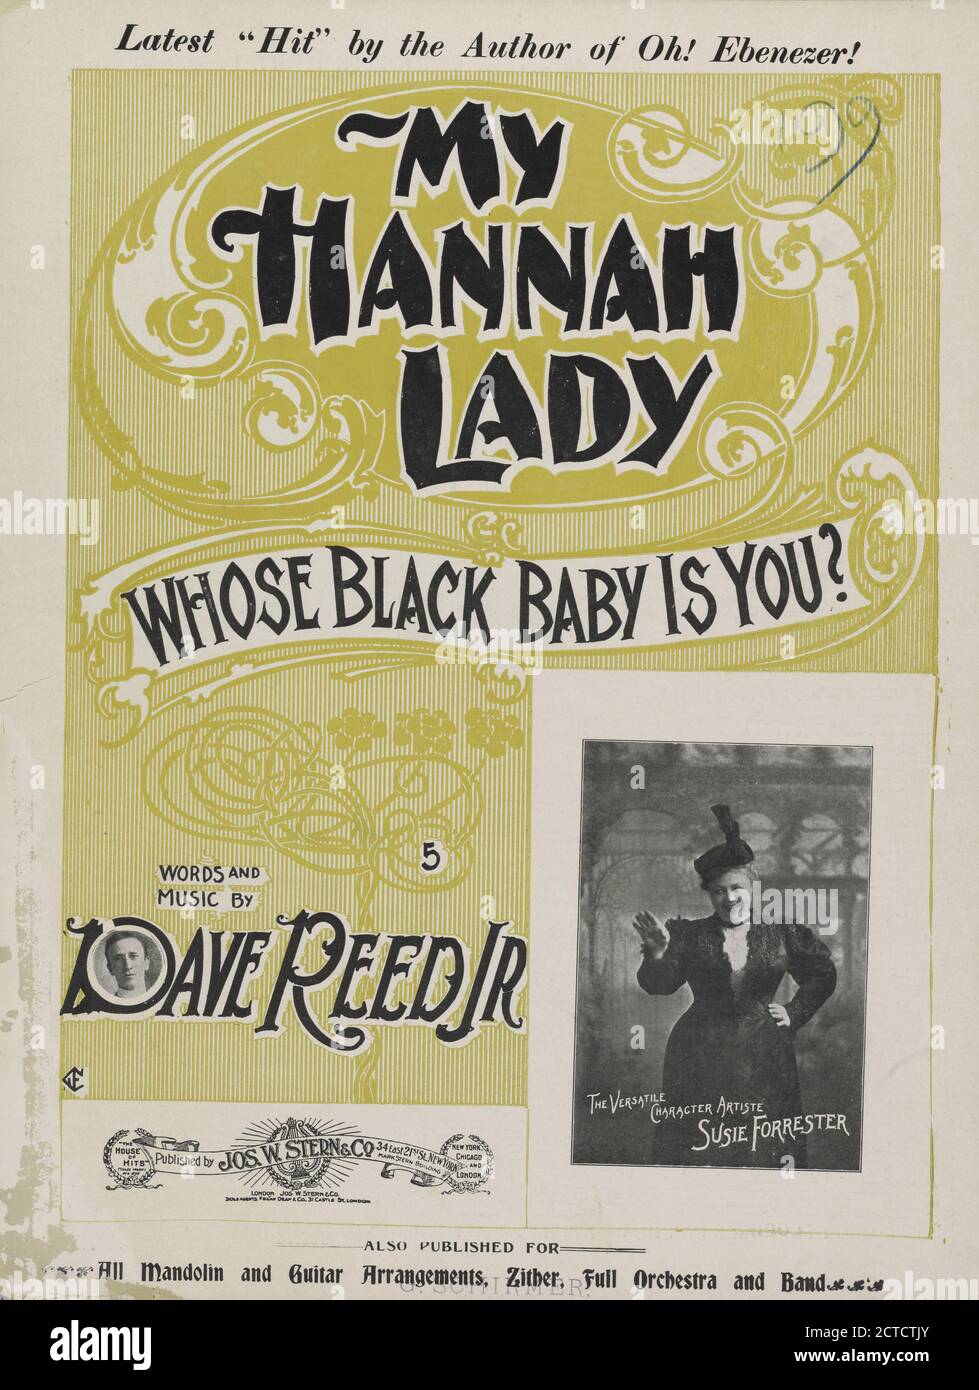 My Hannah lady, whose black baby is you, notated music, Scores, 1899 - 1899, Reed, David (1872-1946), Shaw, Alma, Reed, David (1872-1946 Stock Photo